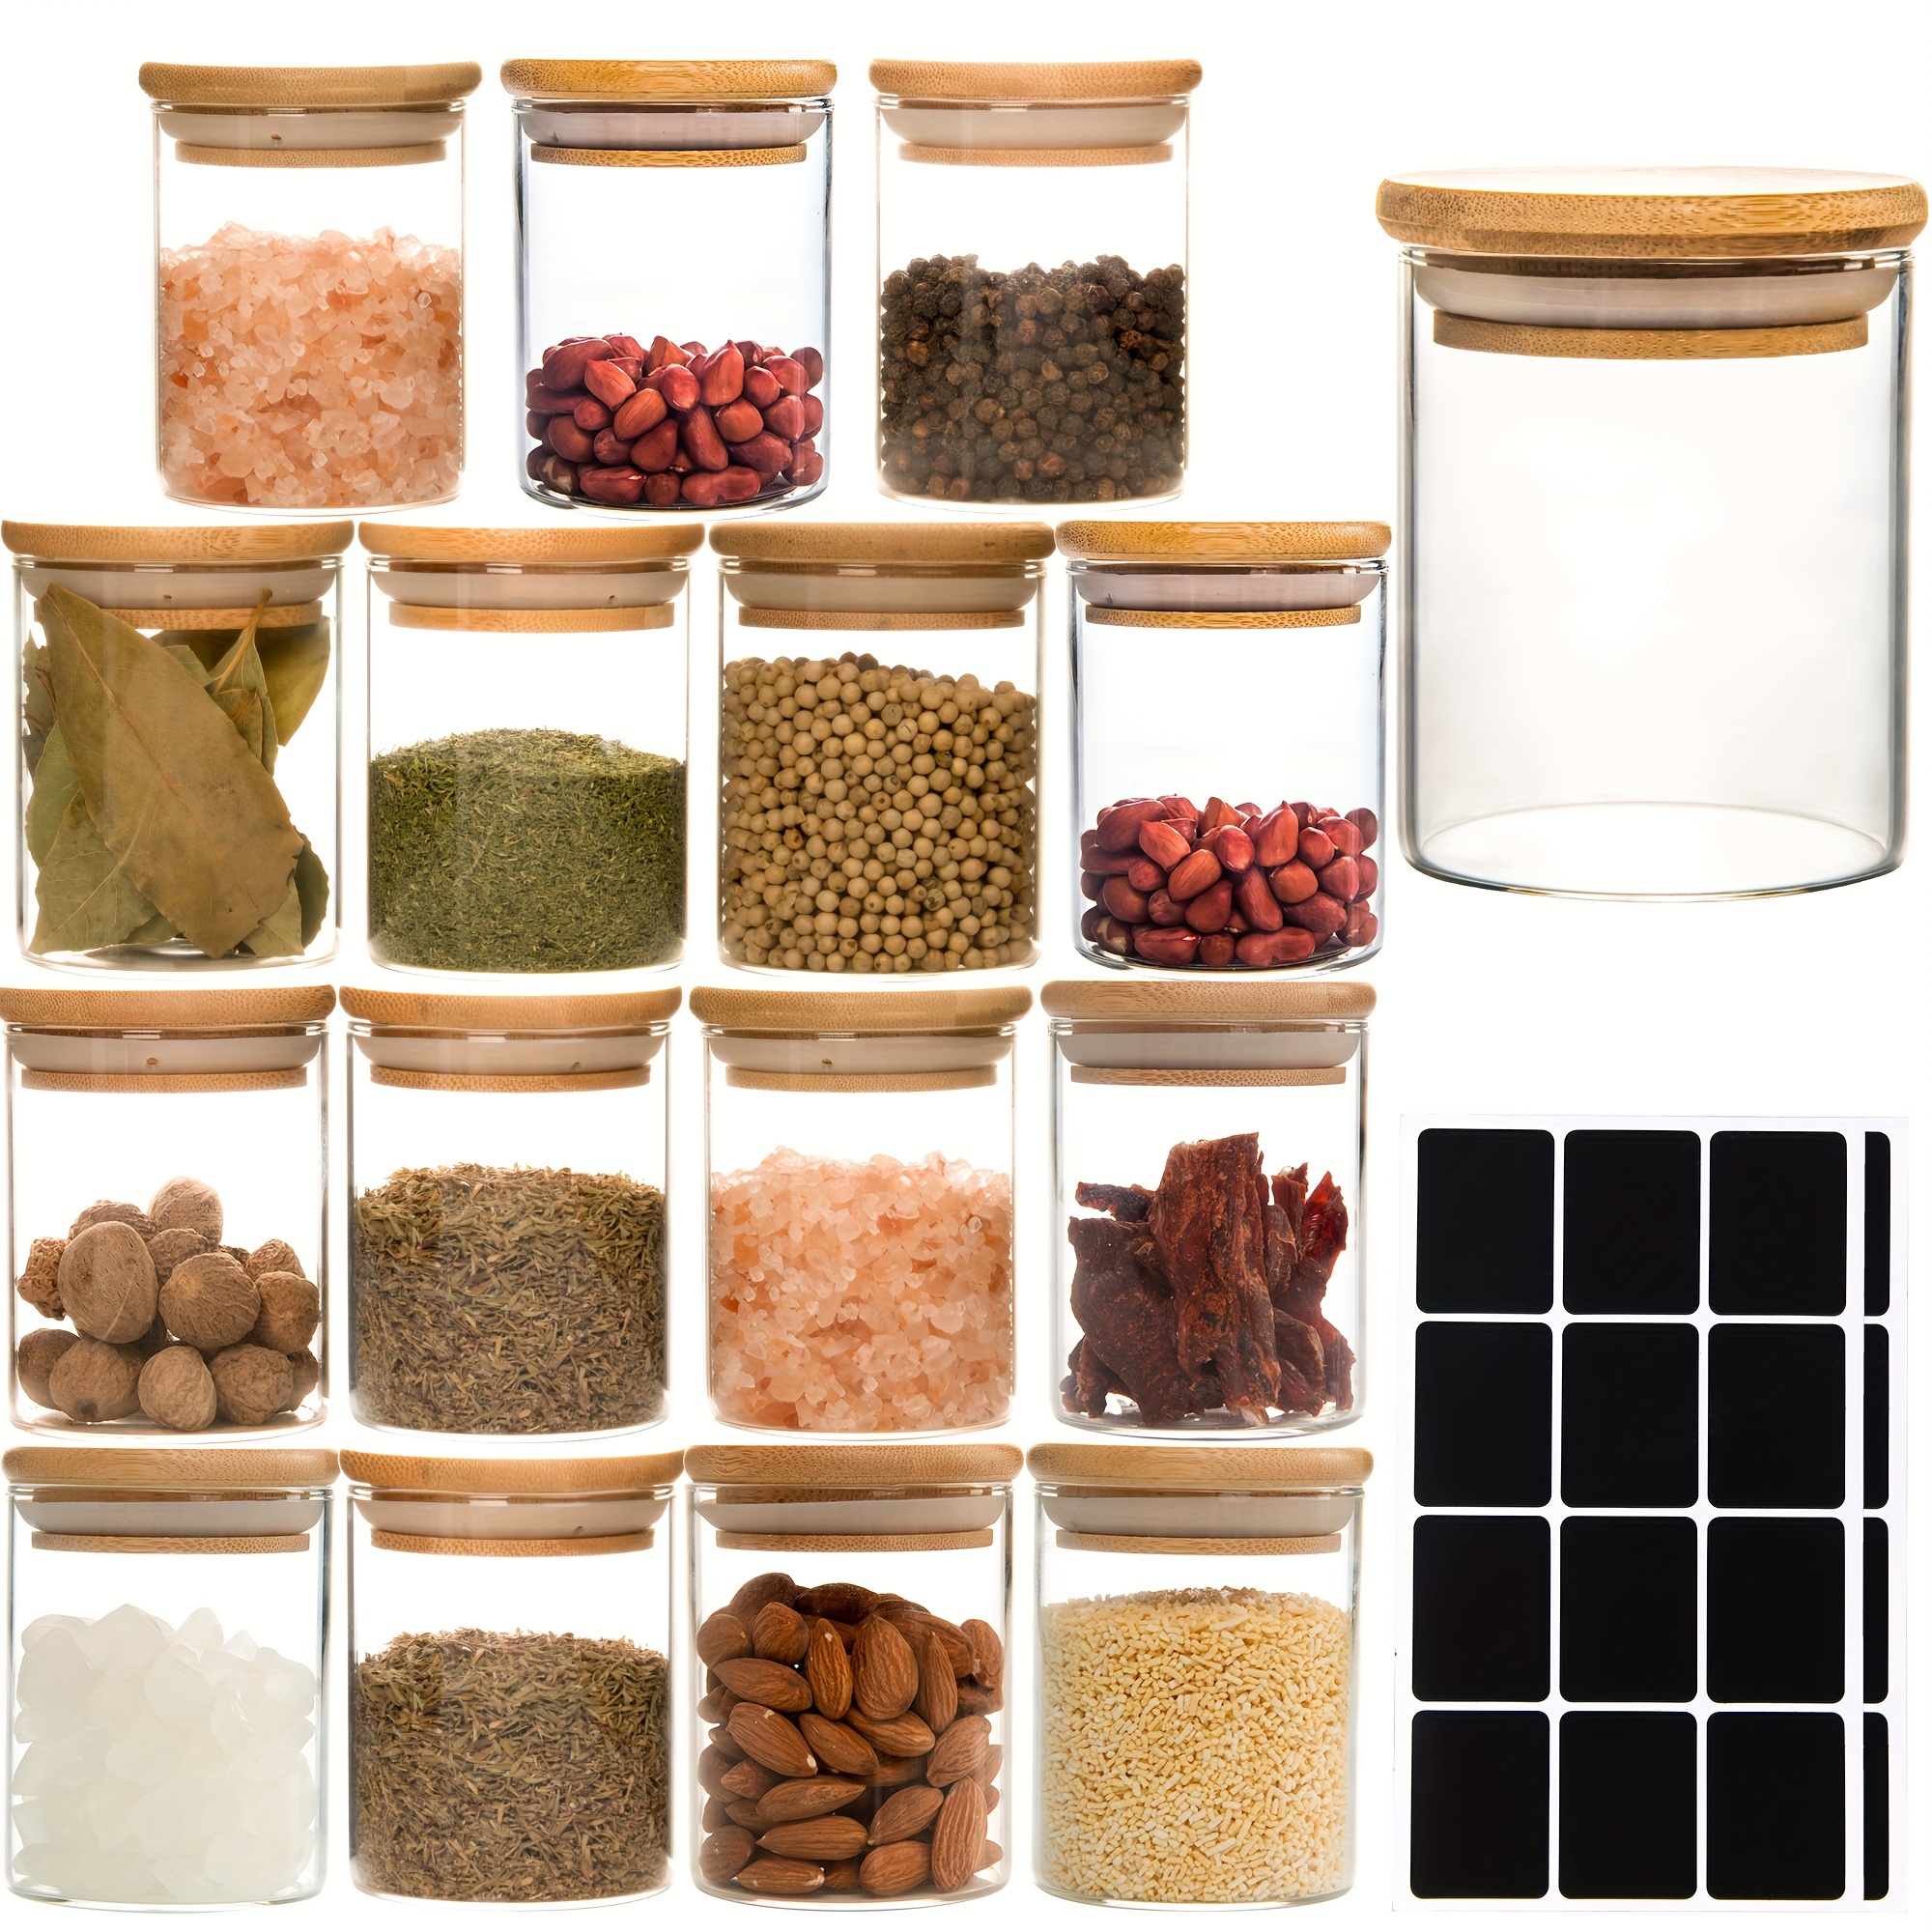 

[16 Pack] 6.5 Oz Glass Jars With Lids, Spice Jars Set With Bamboo Lids For Spice, Beans, Candy, Nuts, Herbs, Dry Food Canisters With Extra Chalkboard Labels